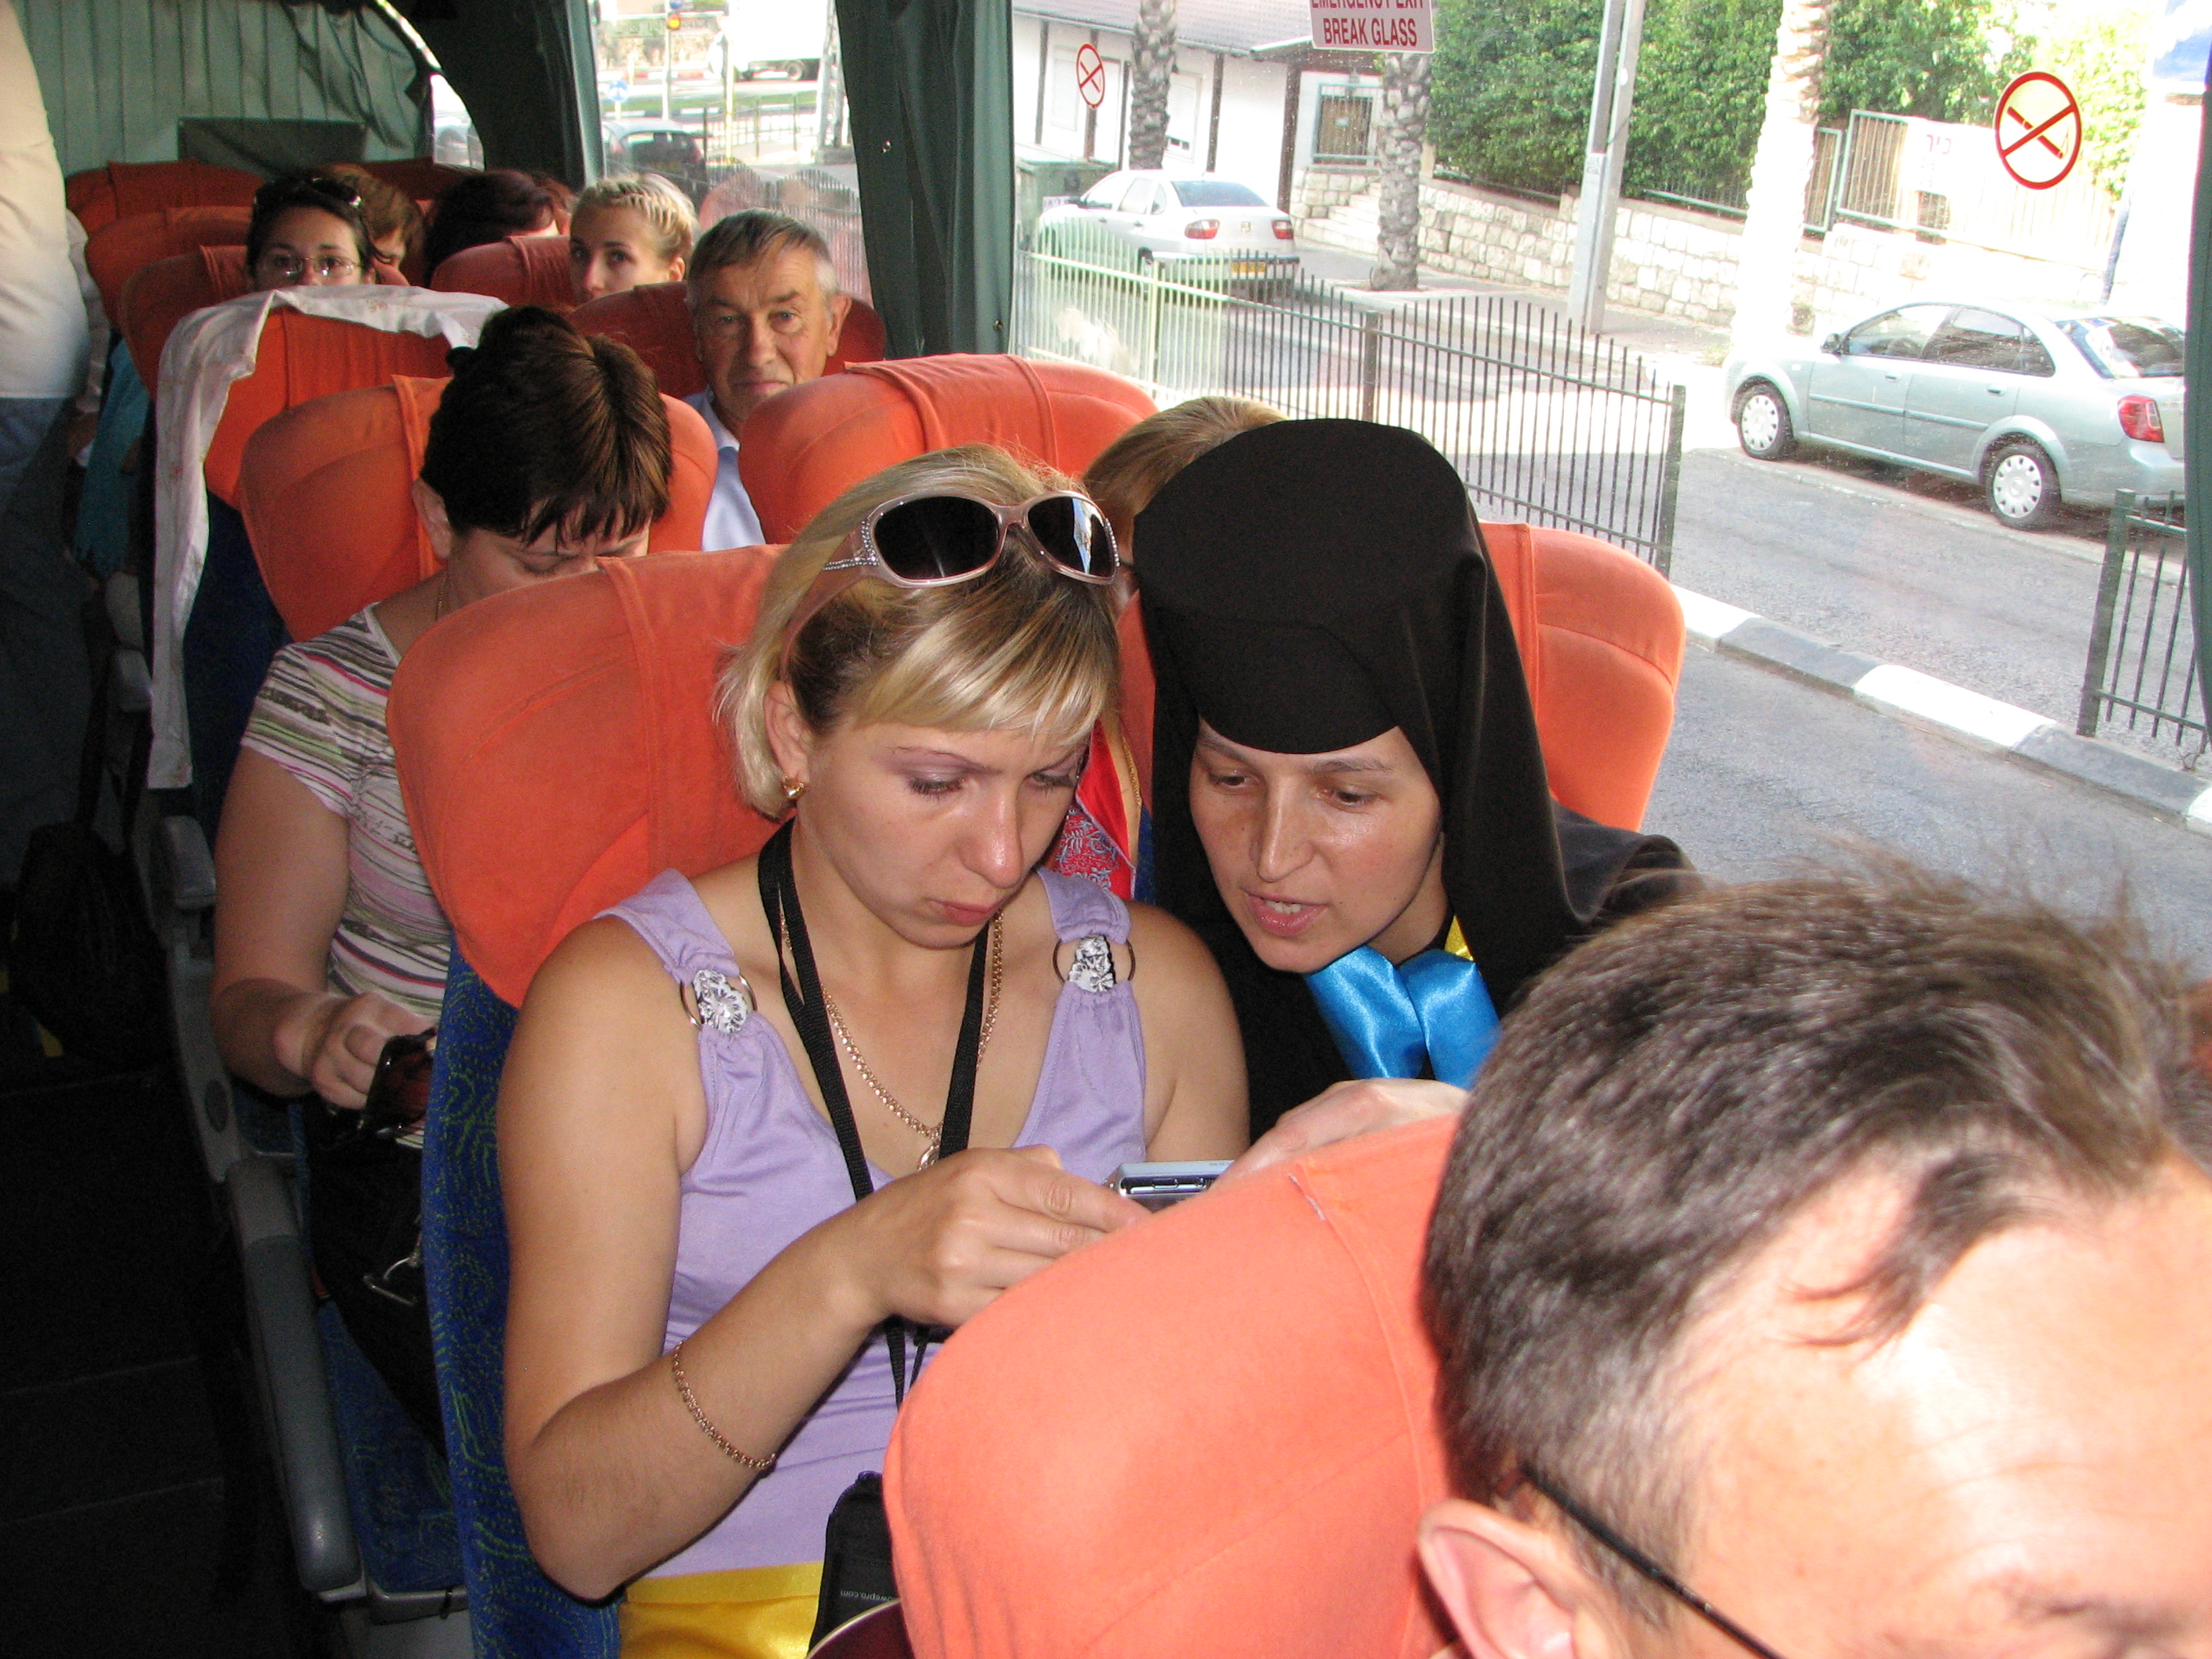 Christian pilgrims in a bus in Israel